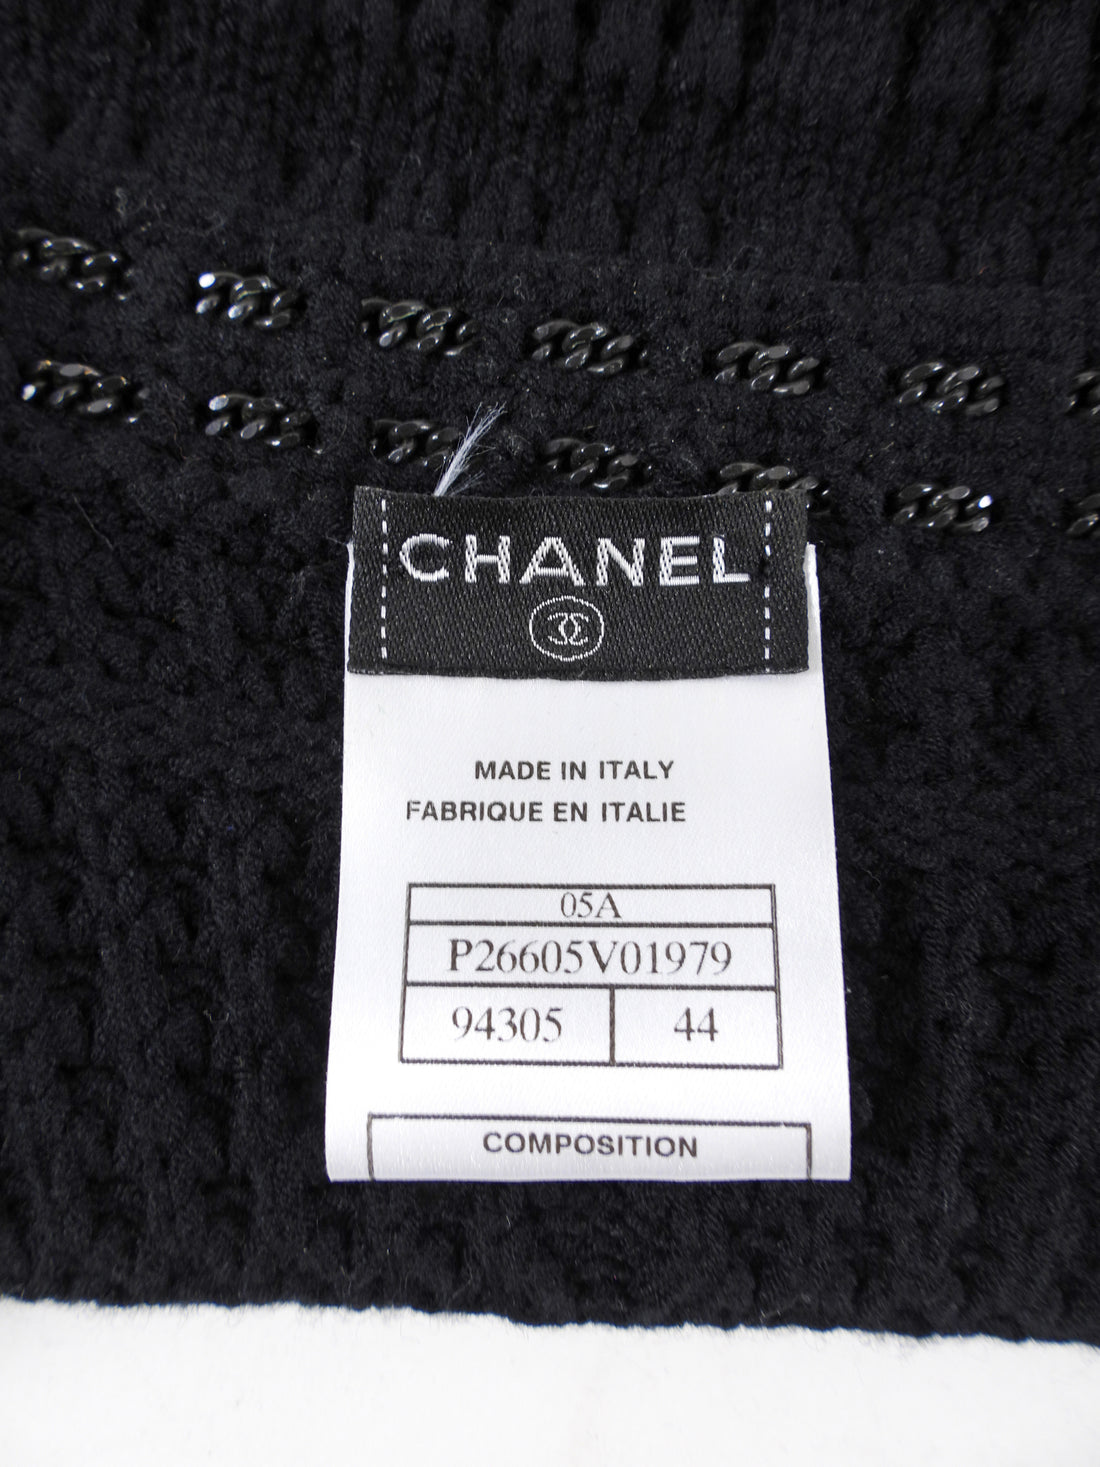 Chanel 05A Black Textured Knit Cardigan Sweater with Chain Trim